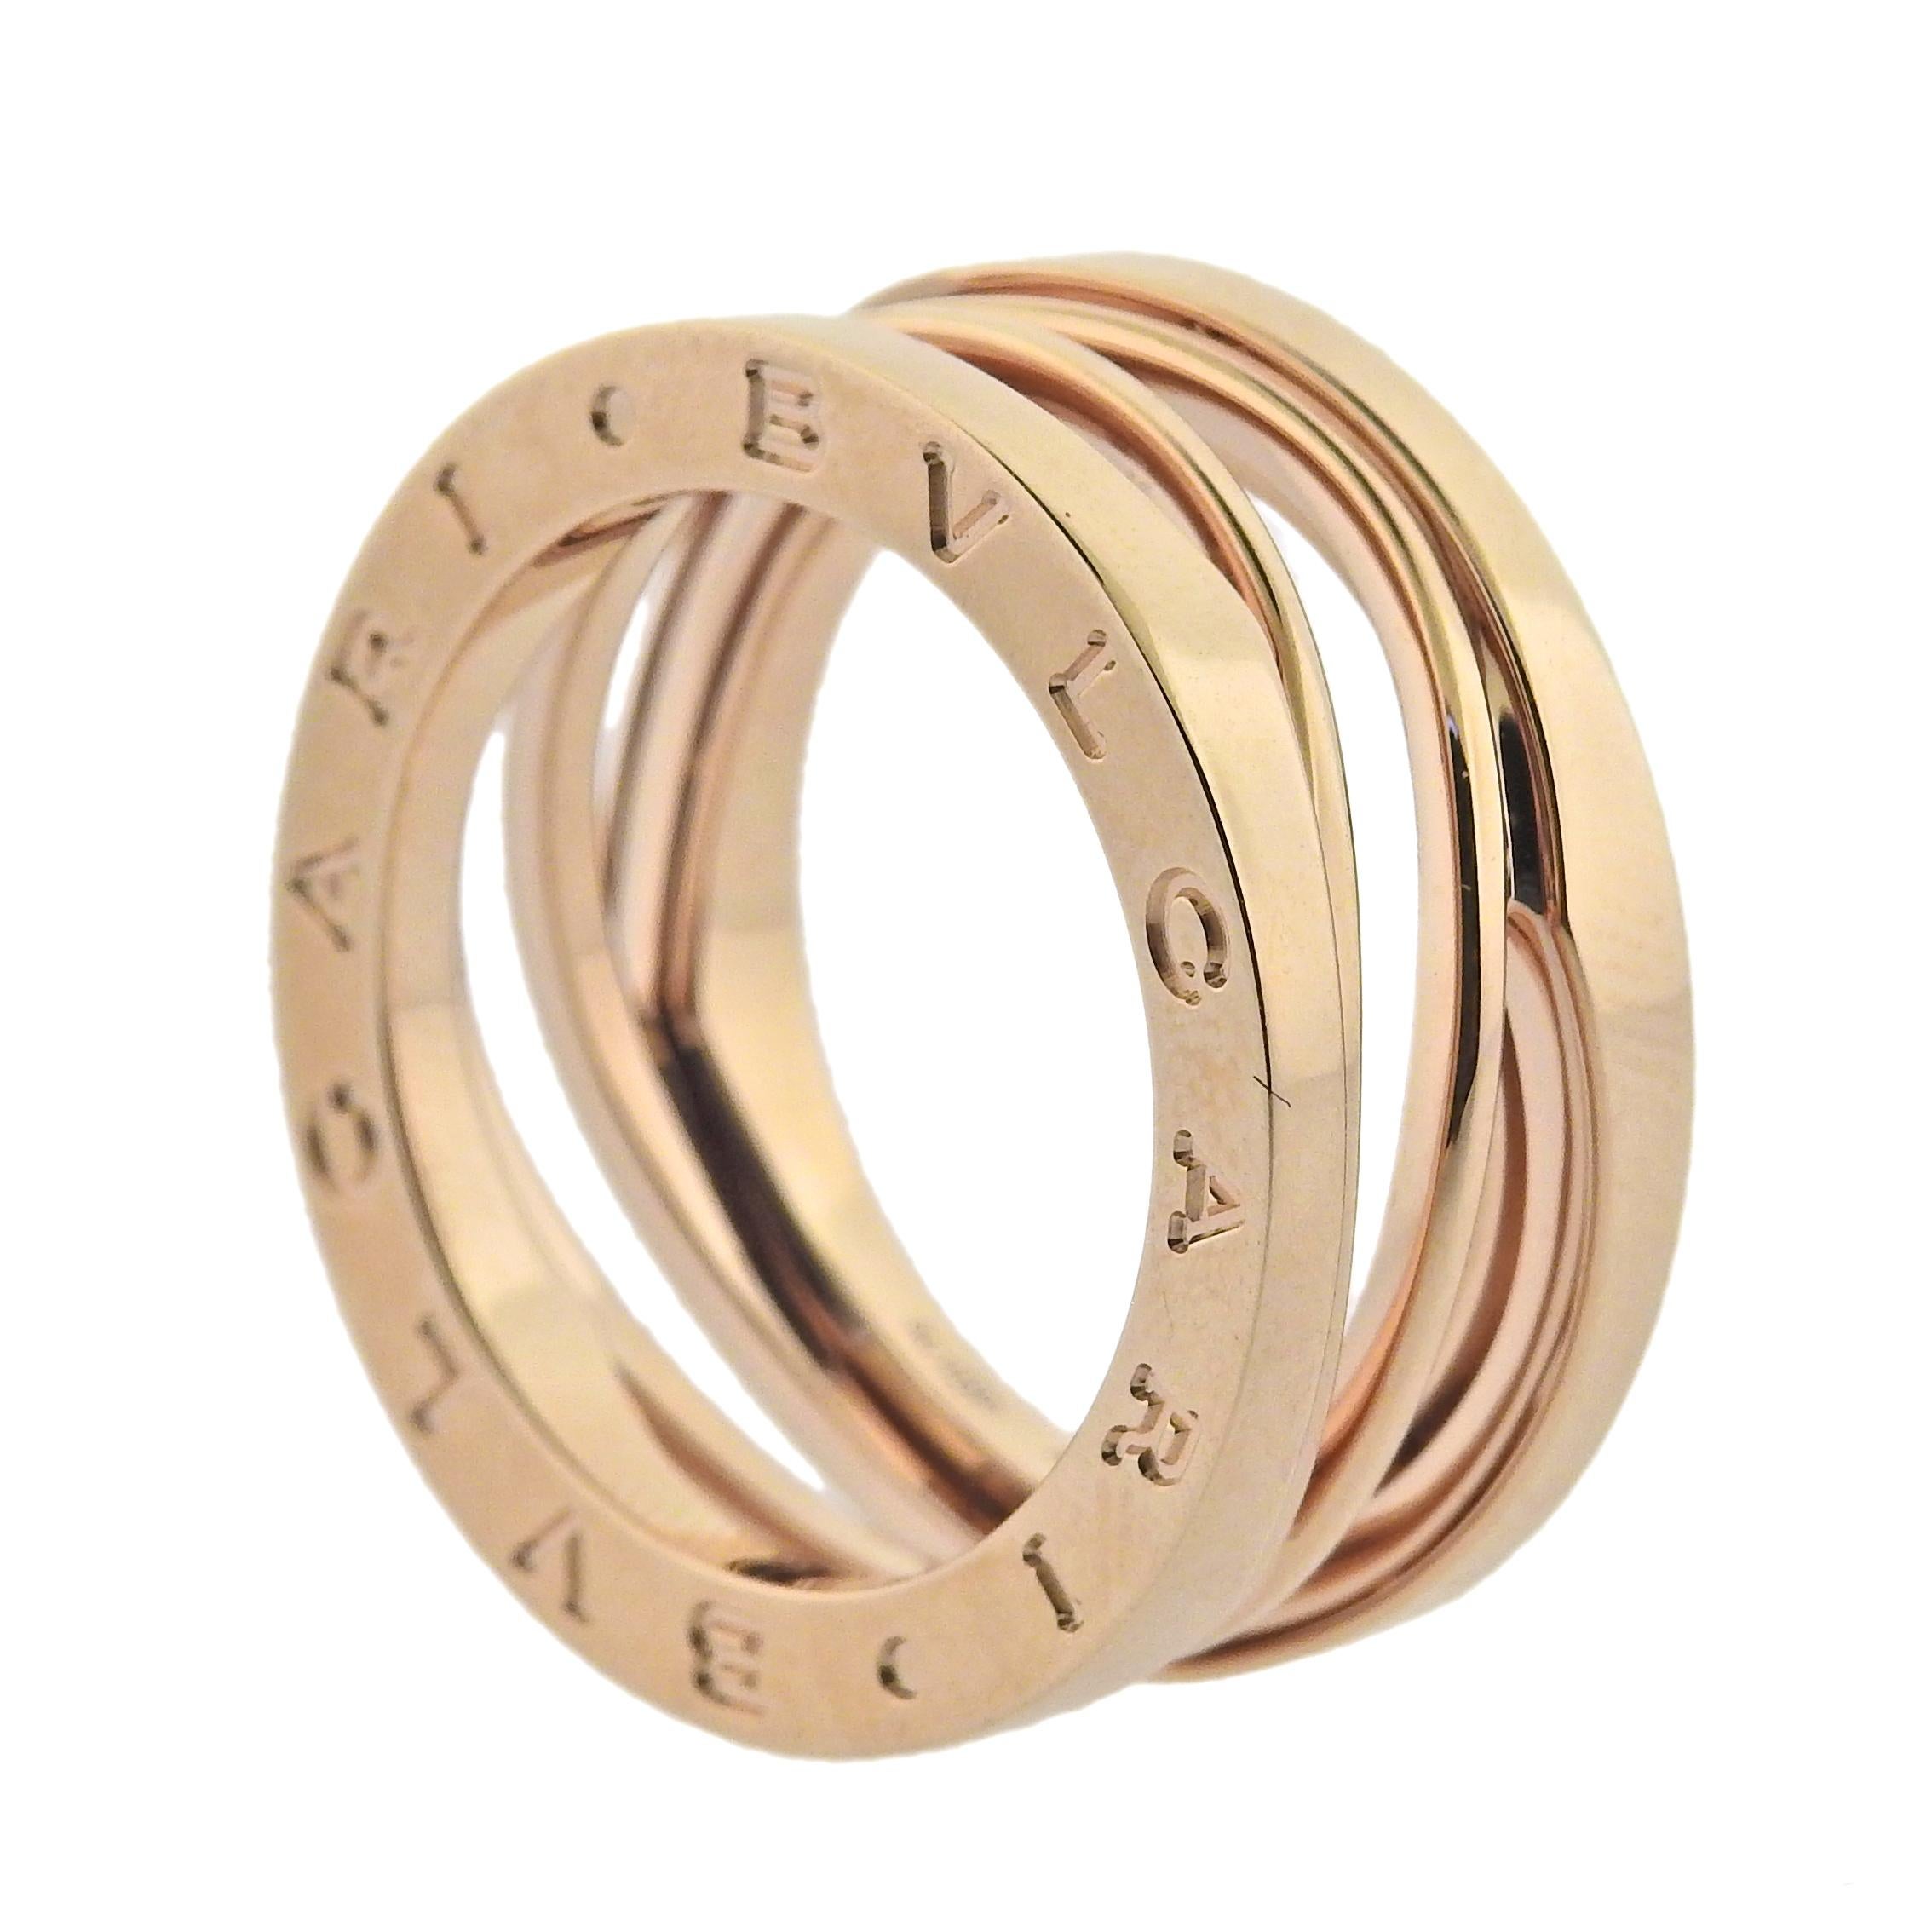 18k rose gold Bvlgari B.Zero1 ring. Retail $2740. Comes with COA and box.  Ring size 7, ring is 10mm wide. Marked Bvlgari, made in Italy, Italian mark, 750, Serial number. Weight 10.2 grams